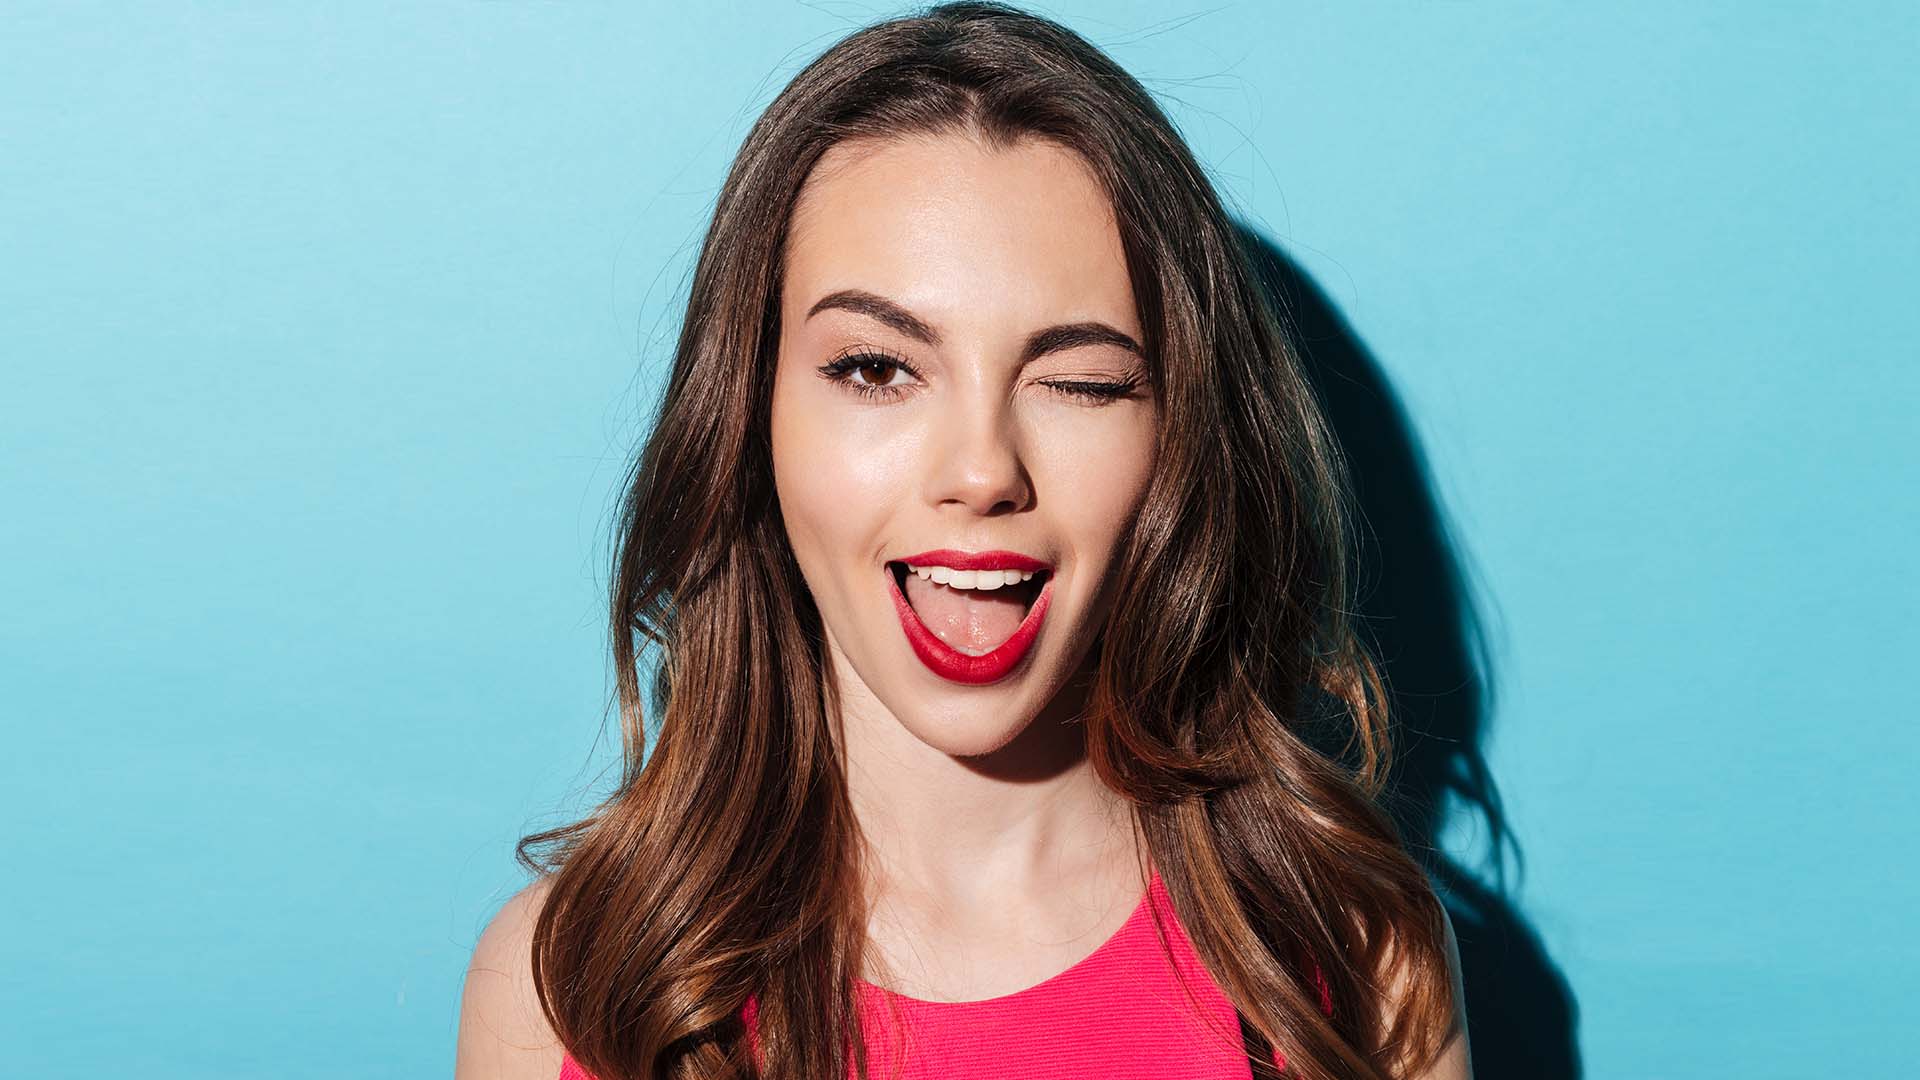 Brunette woman in hot pink shirt and lipstick, winking and smiling. Light blue background.